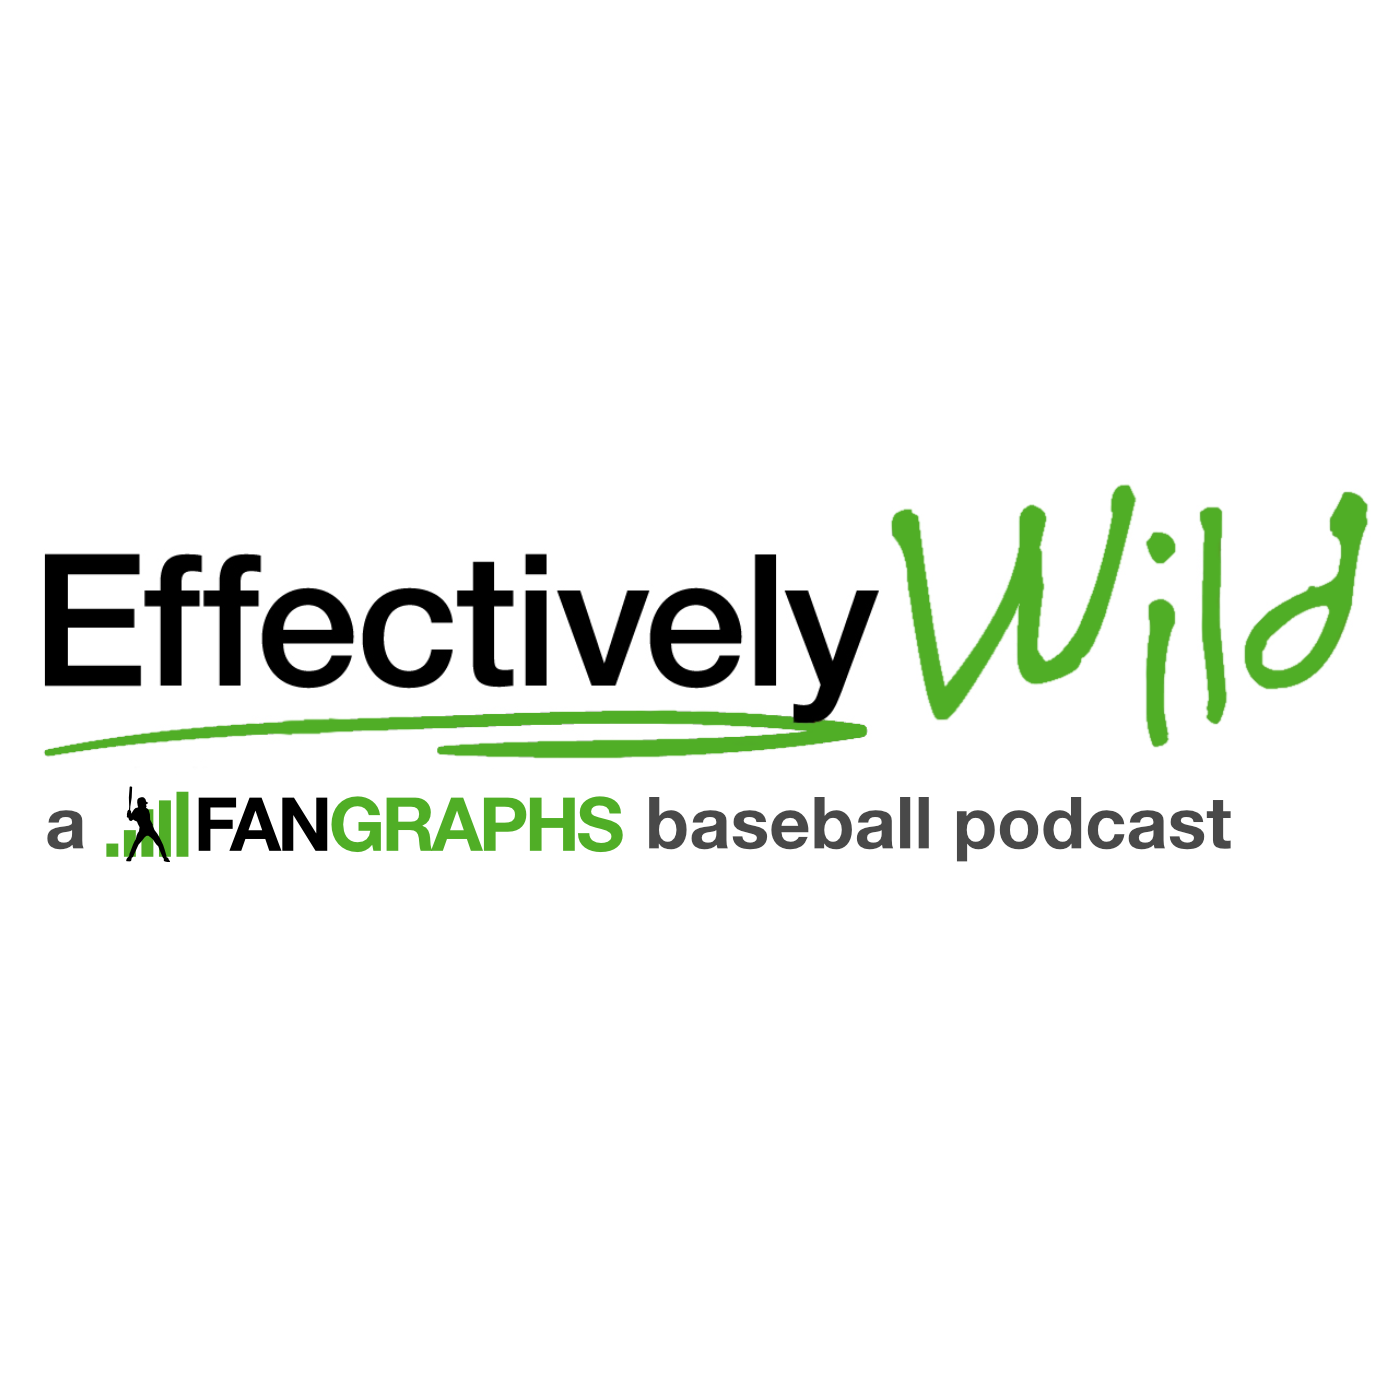 A highlight from Effectively Wild Episode 1989: Baseball Goes Back to the 80s